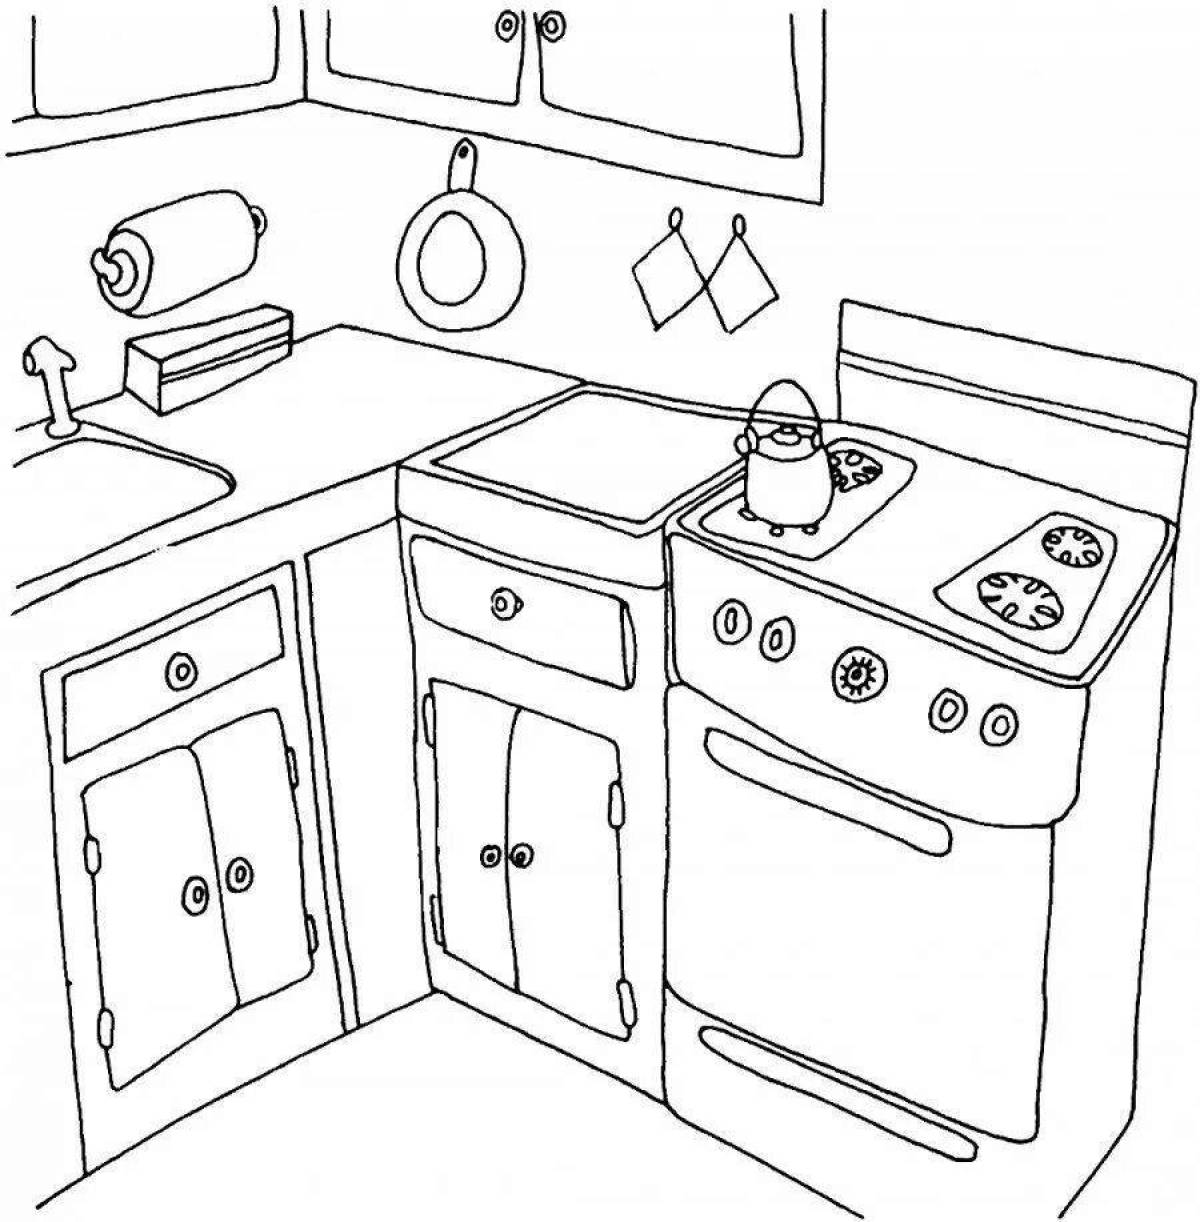 Coloring page charming kitchen set